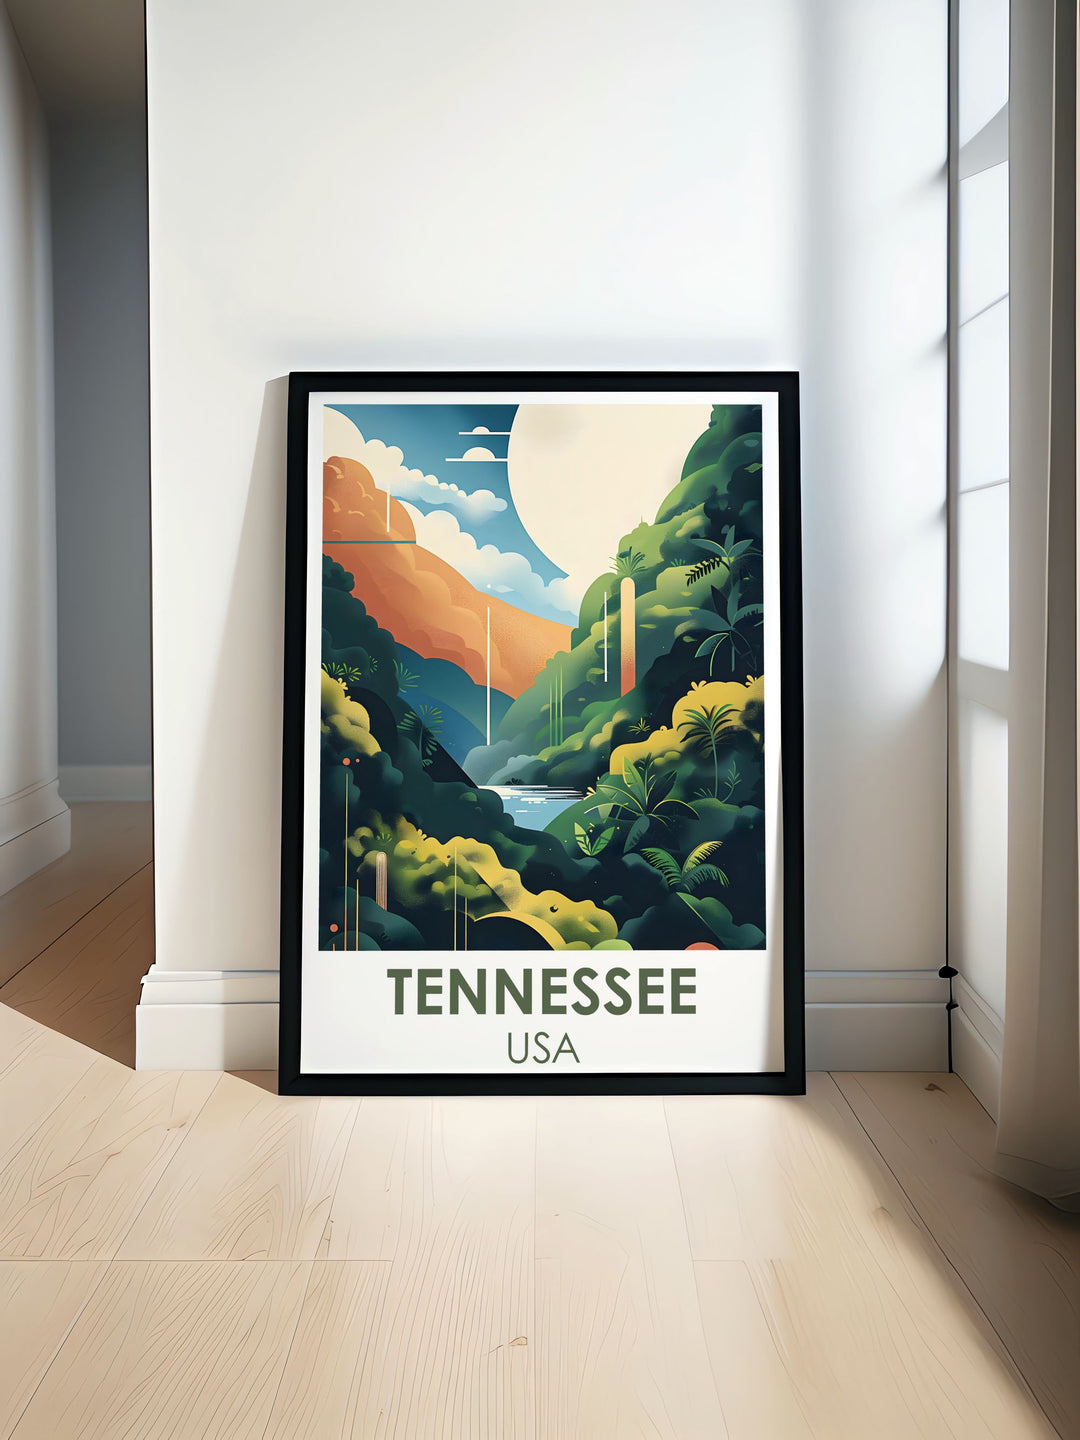 Ryman Auditorium Country Music Art featuring the iconic Nashville Tennessee venue alongside the stunning landscapes of Great Smoky Mountains National Park. Perfect for music and nature lovers this Nashville poster is an excellent addition to any home decor.